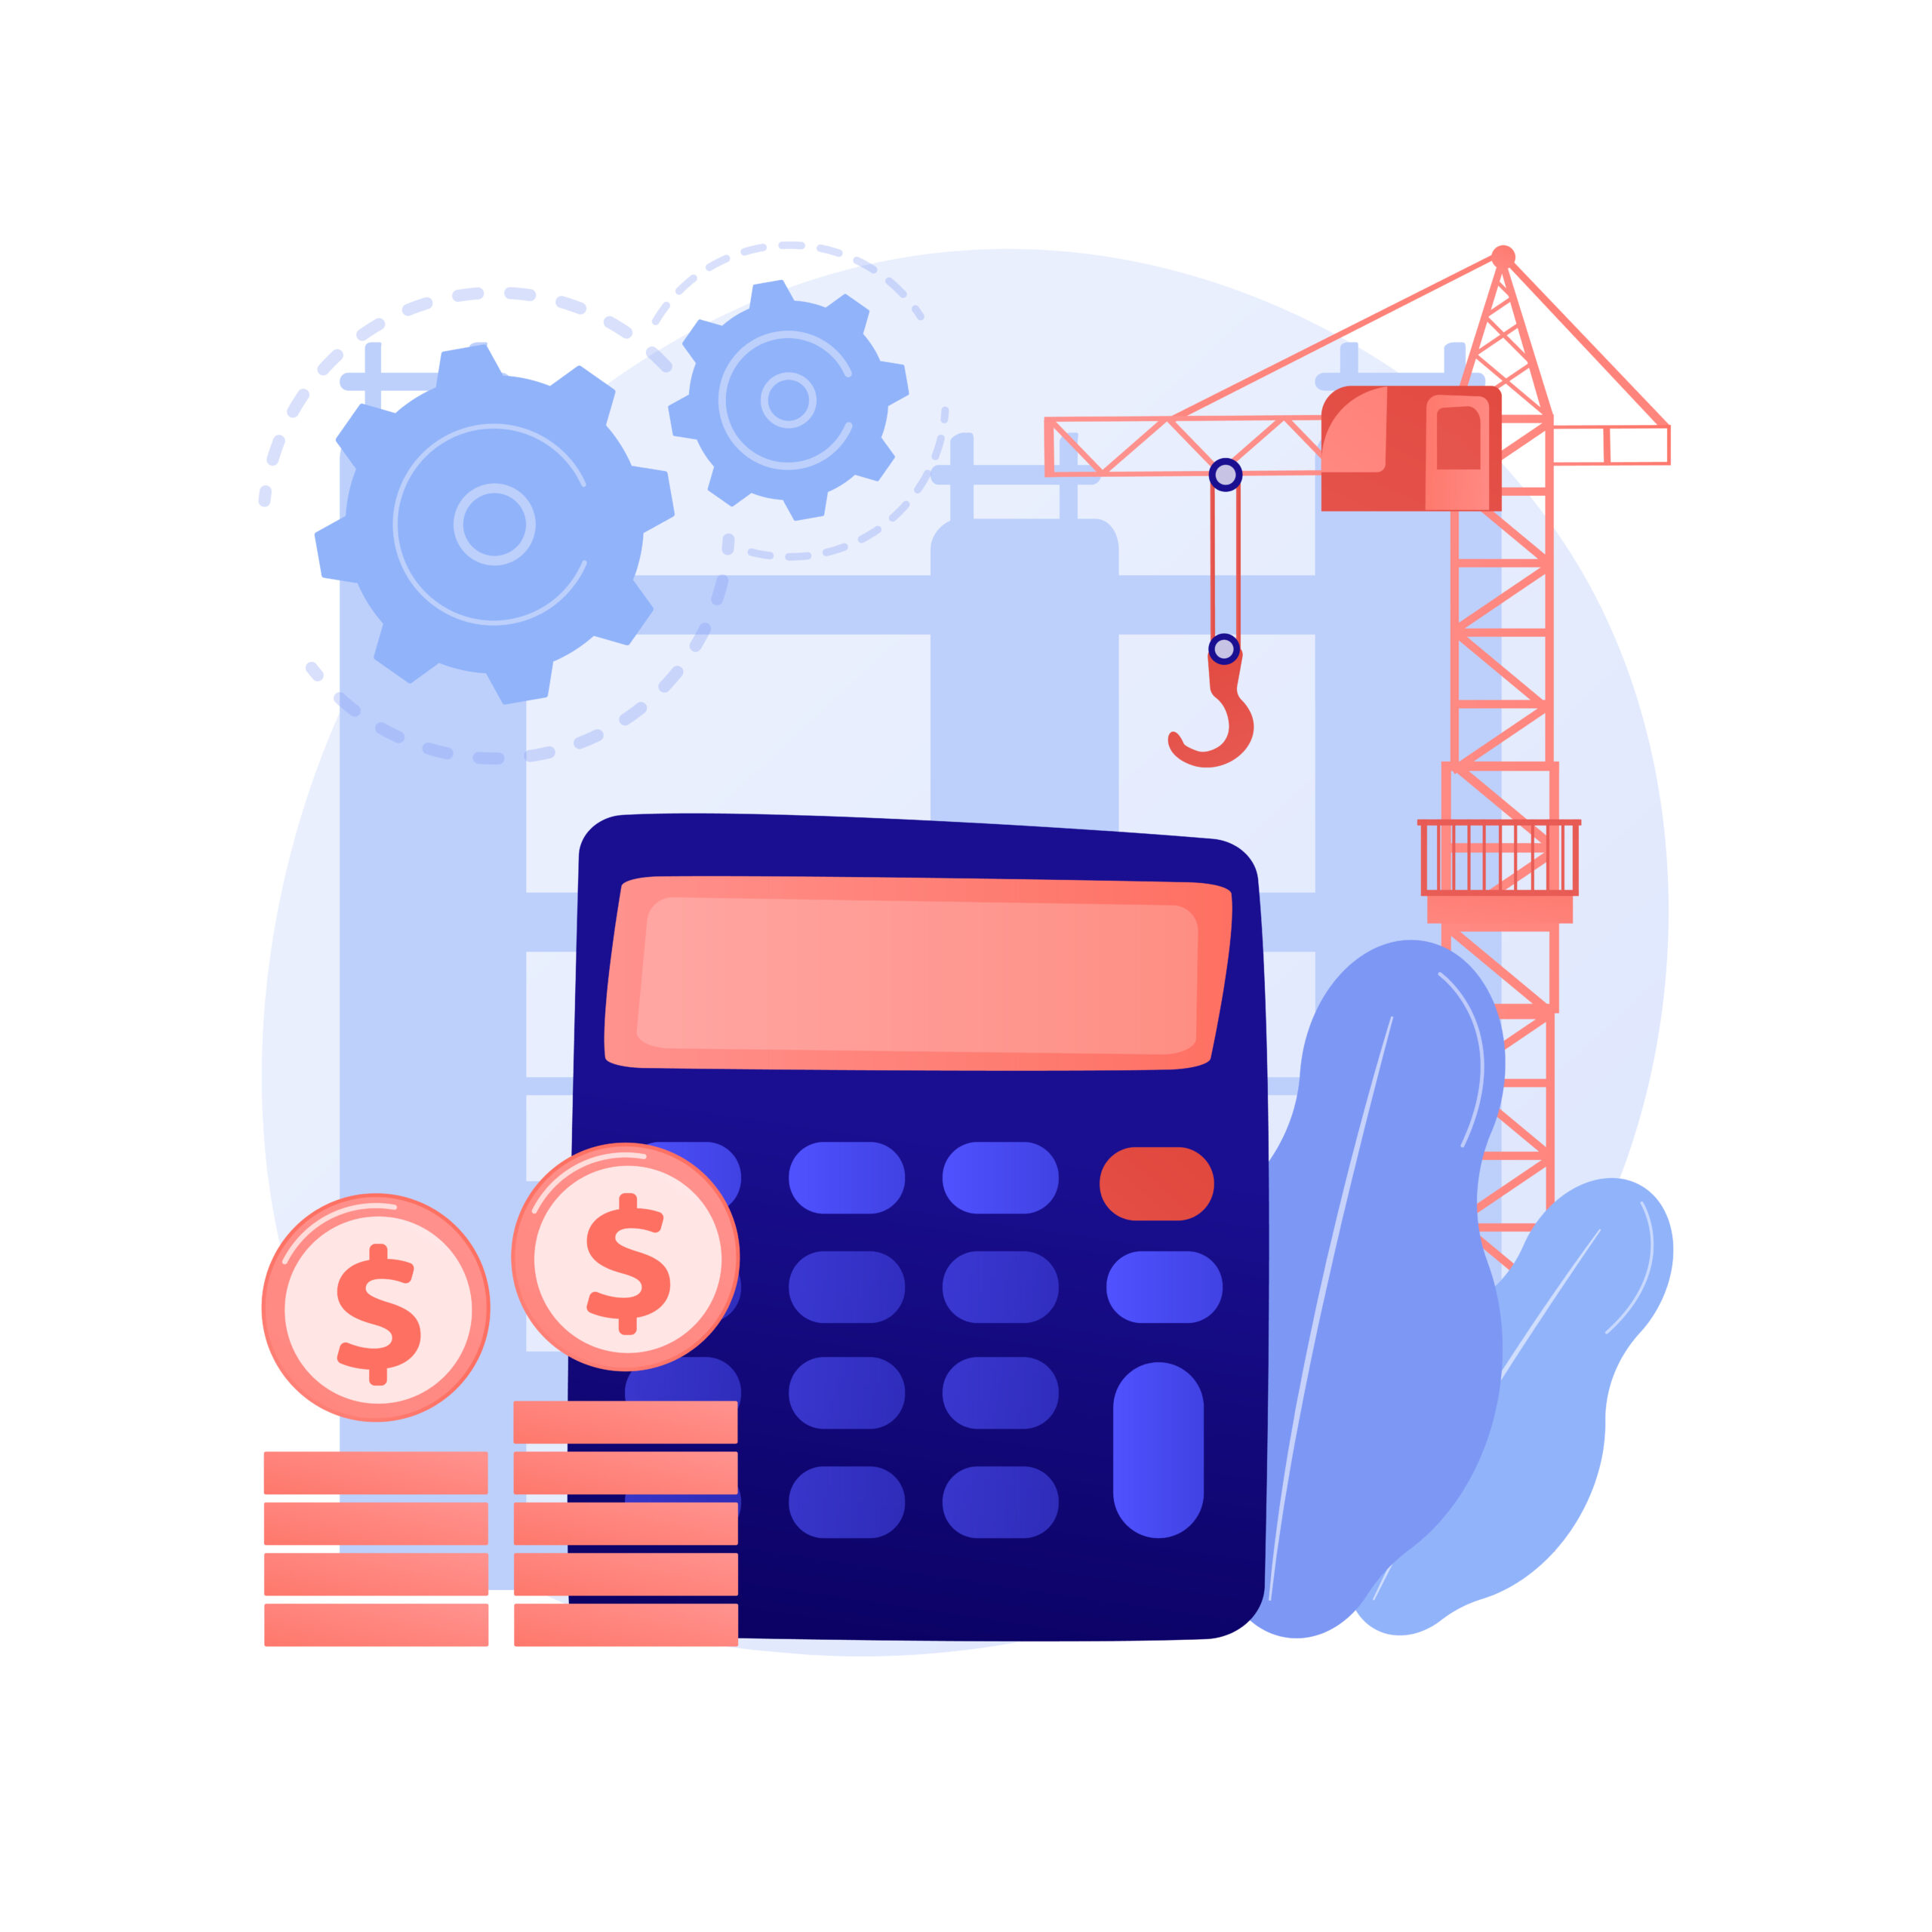 Labor vs material cost in construction: Overview - Bridgit